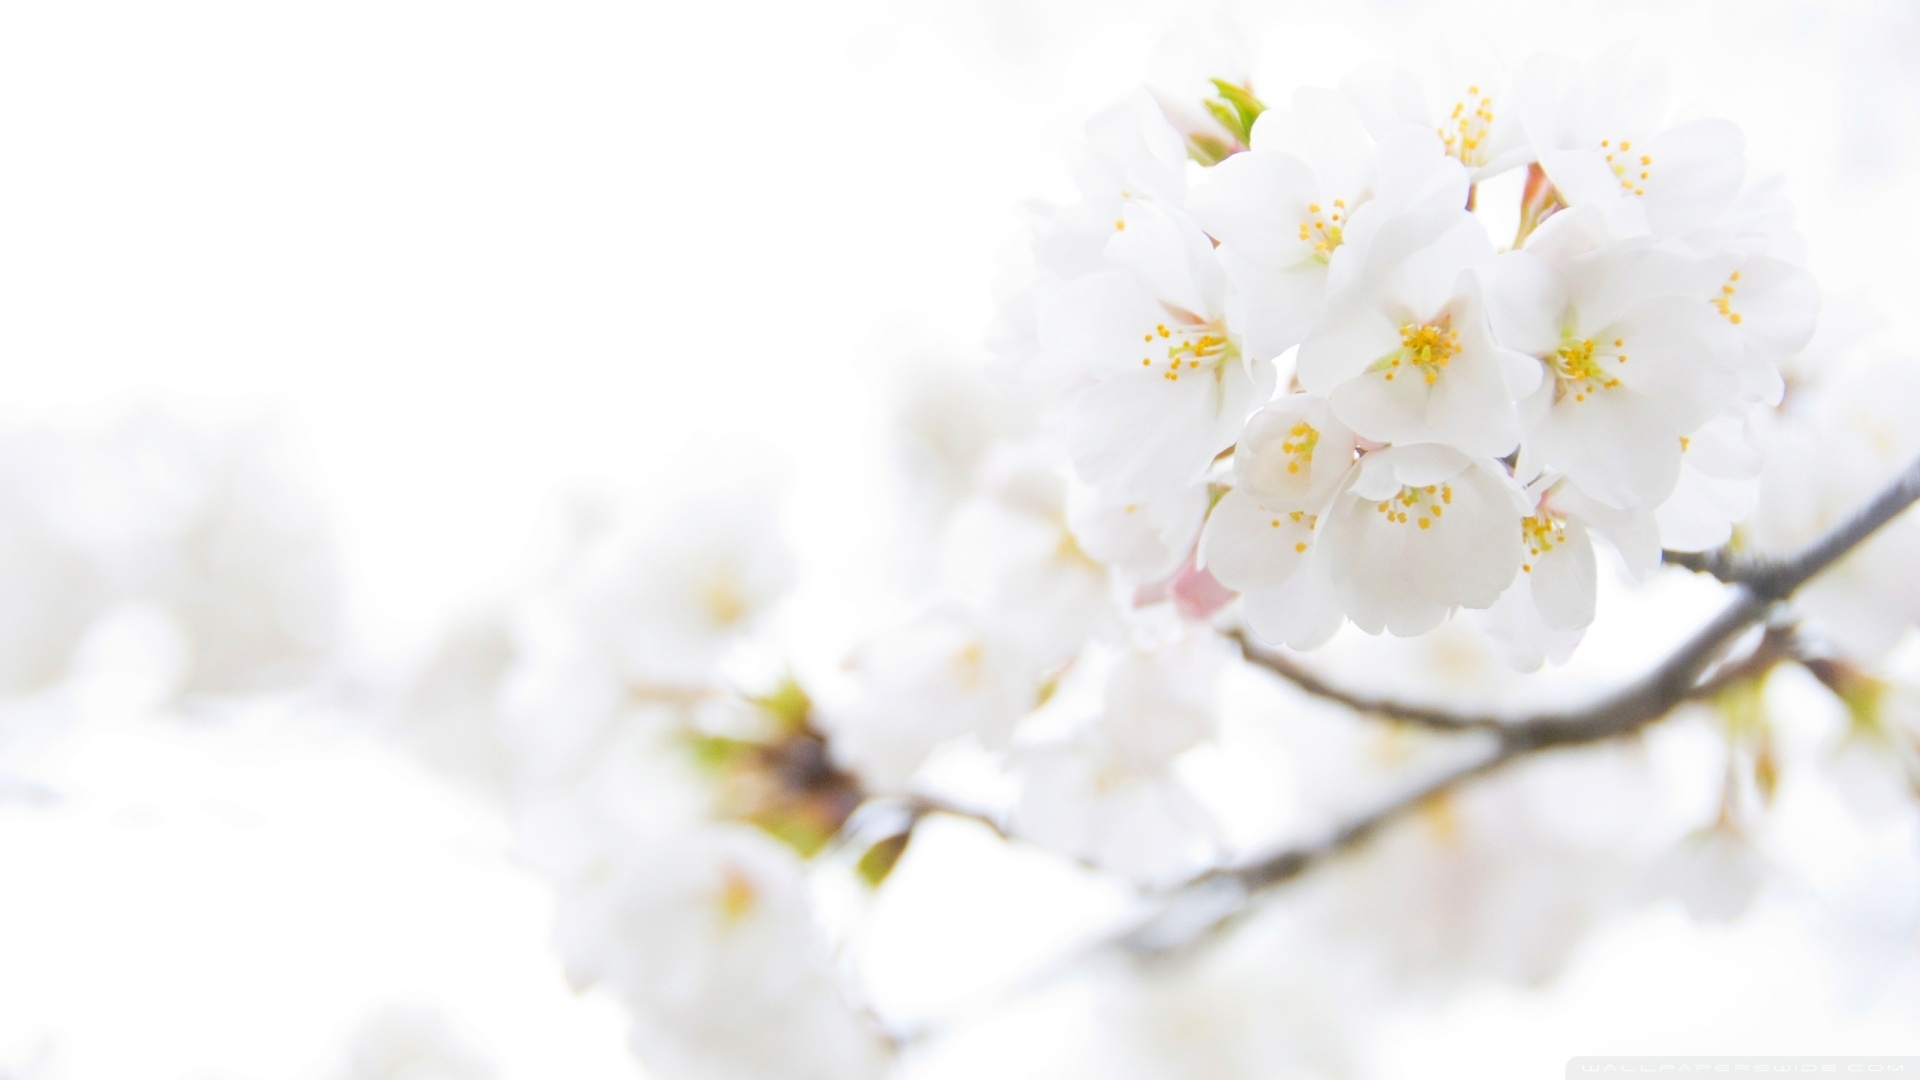 New Lovely White Flowers Images View 846992 Wallpapers RiseWLP